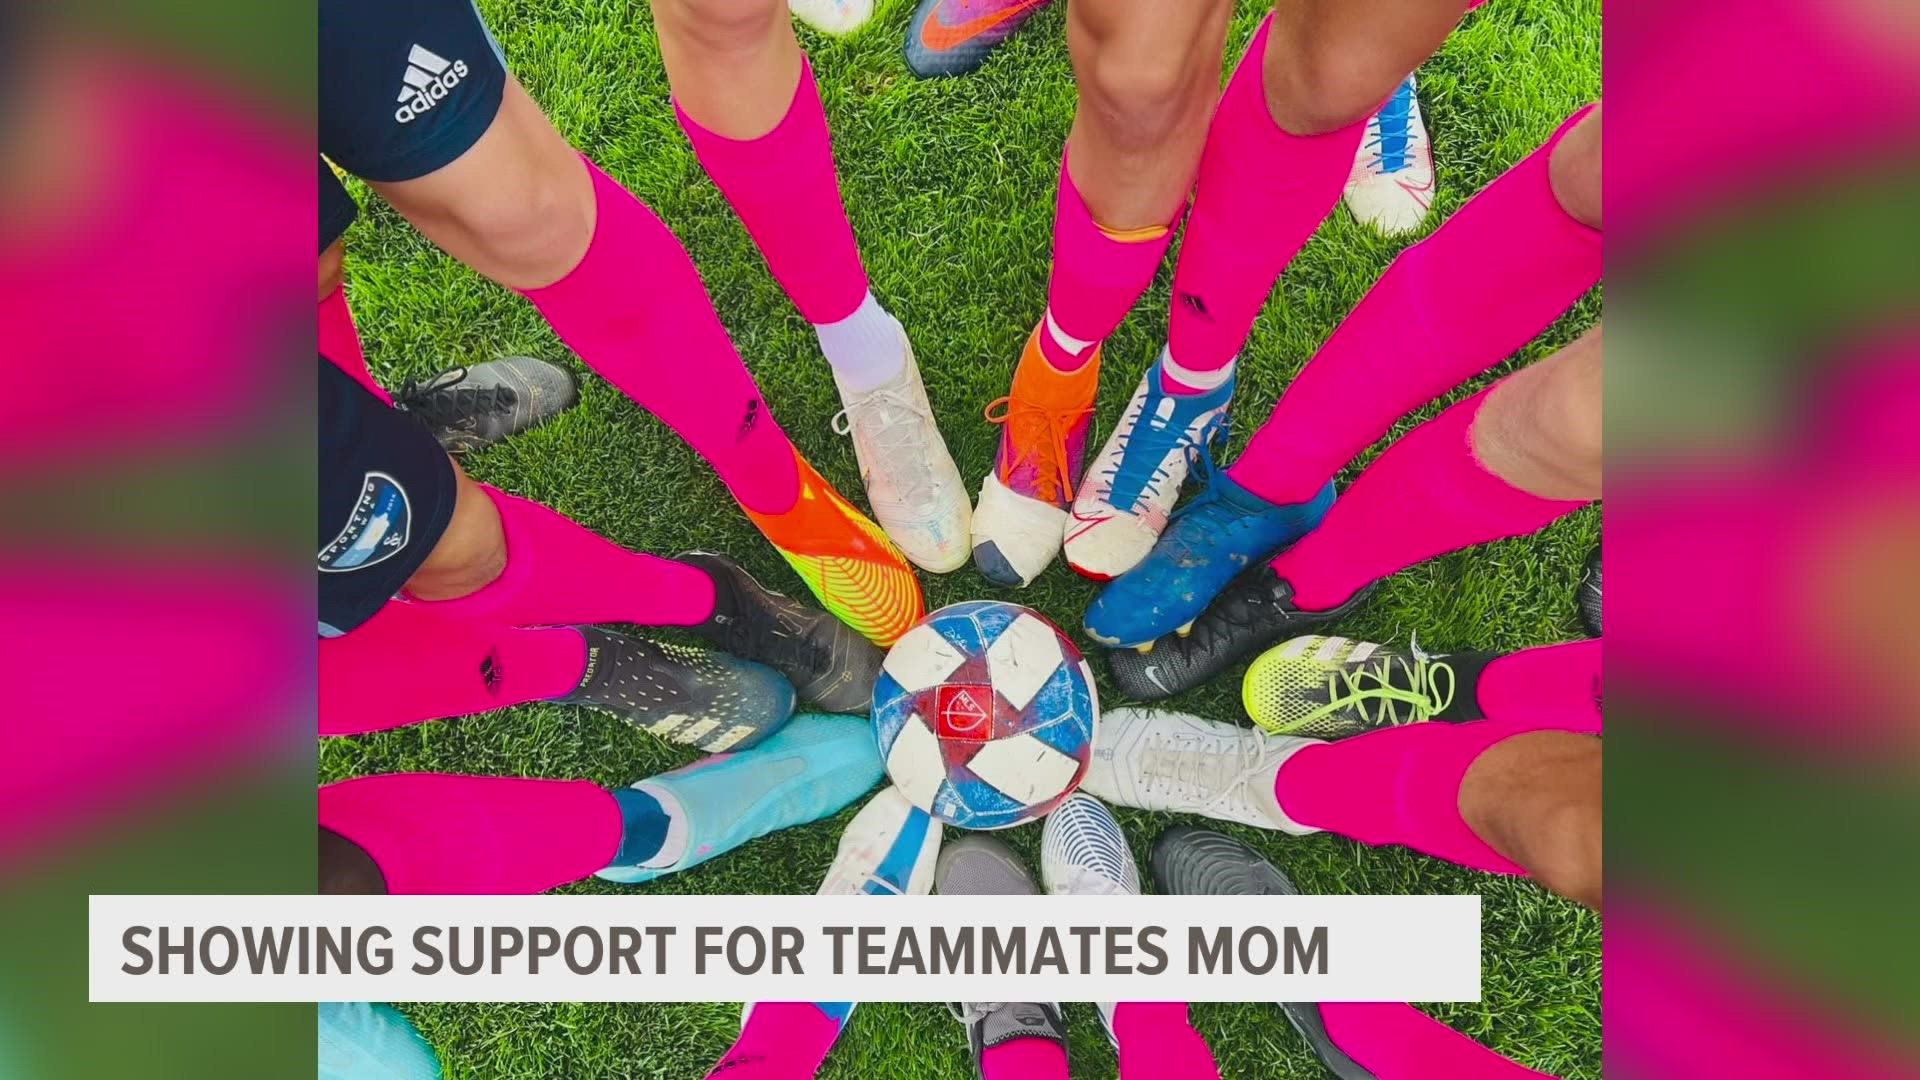 A Sporting Iowa Soccer Club team showing support for a teammate's mom